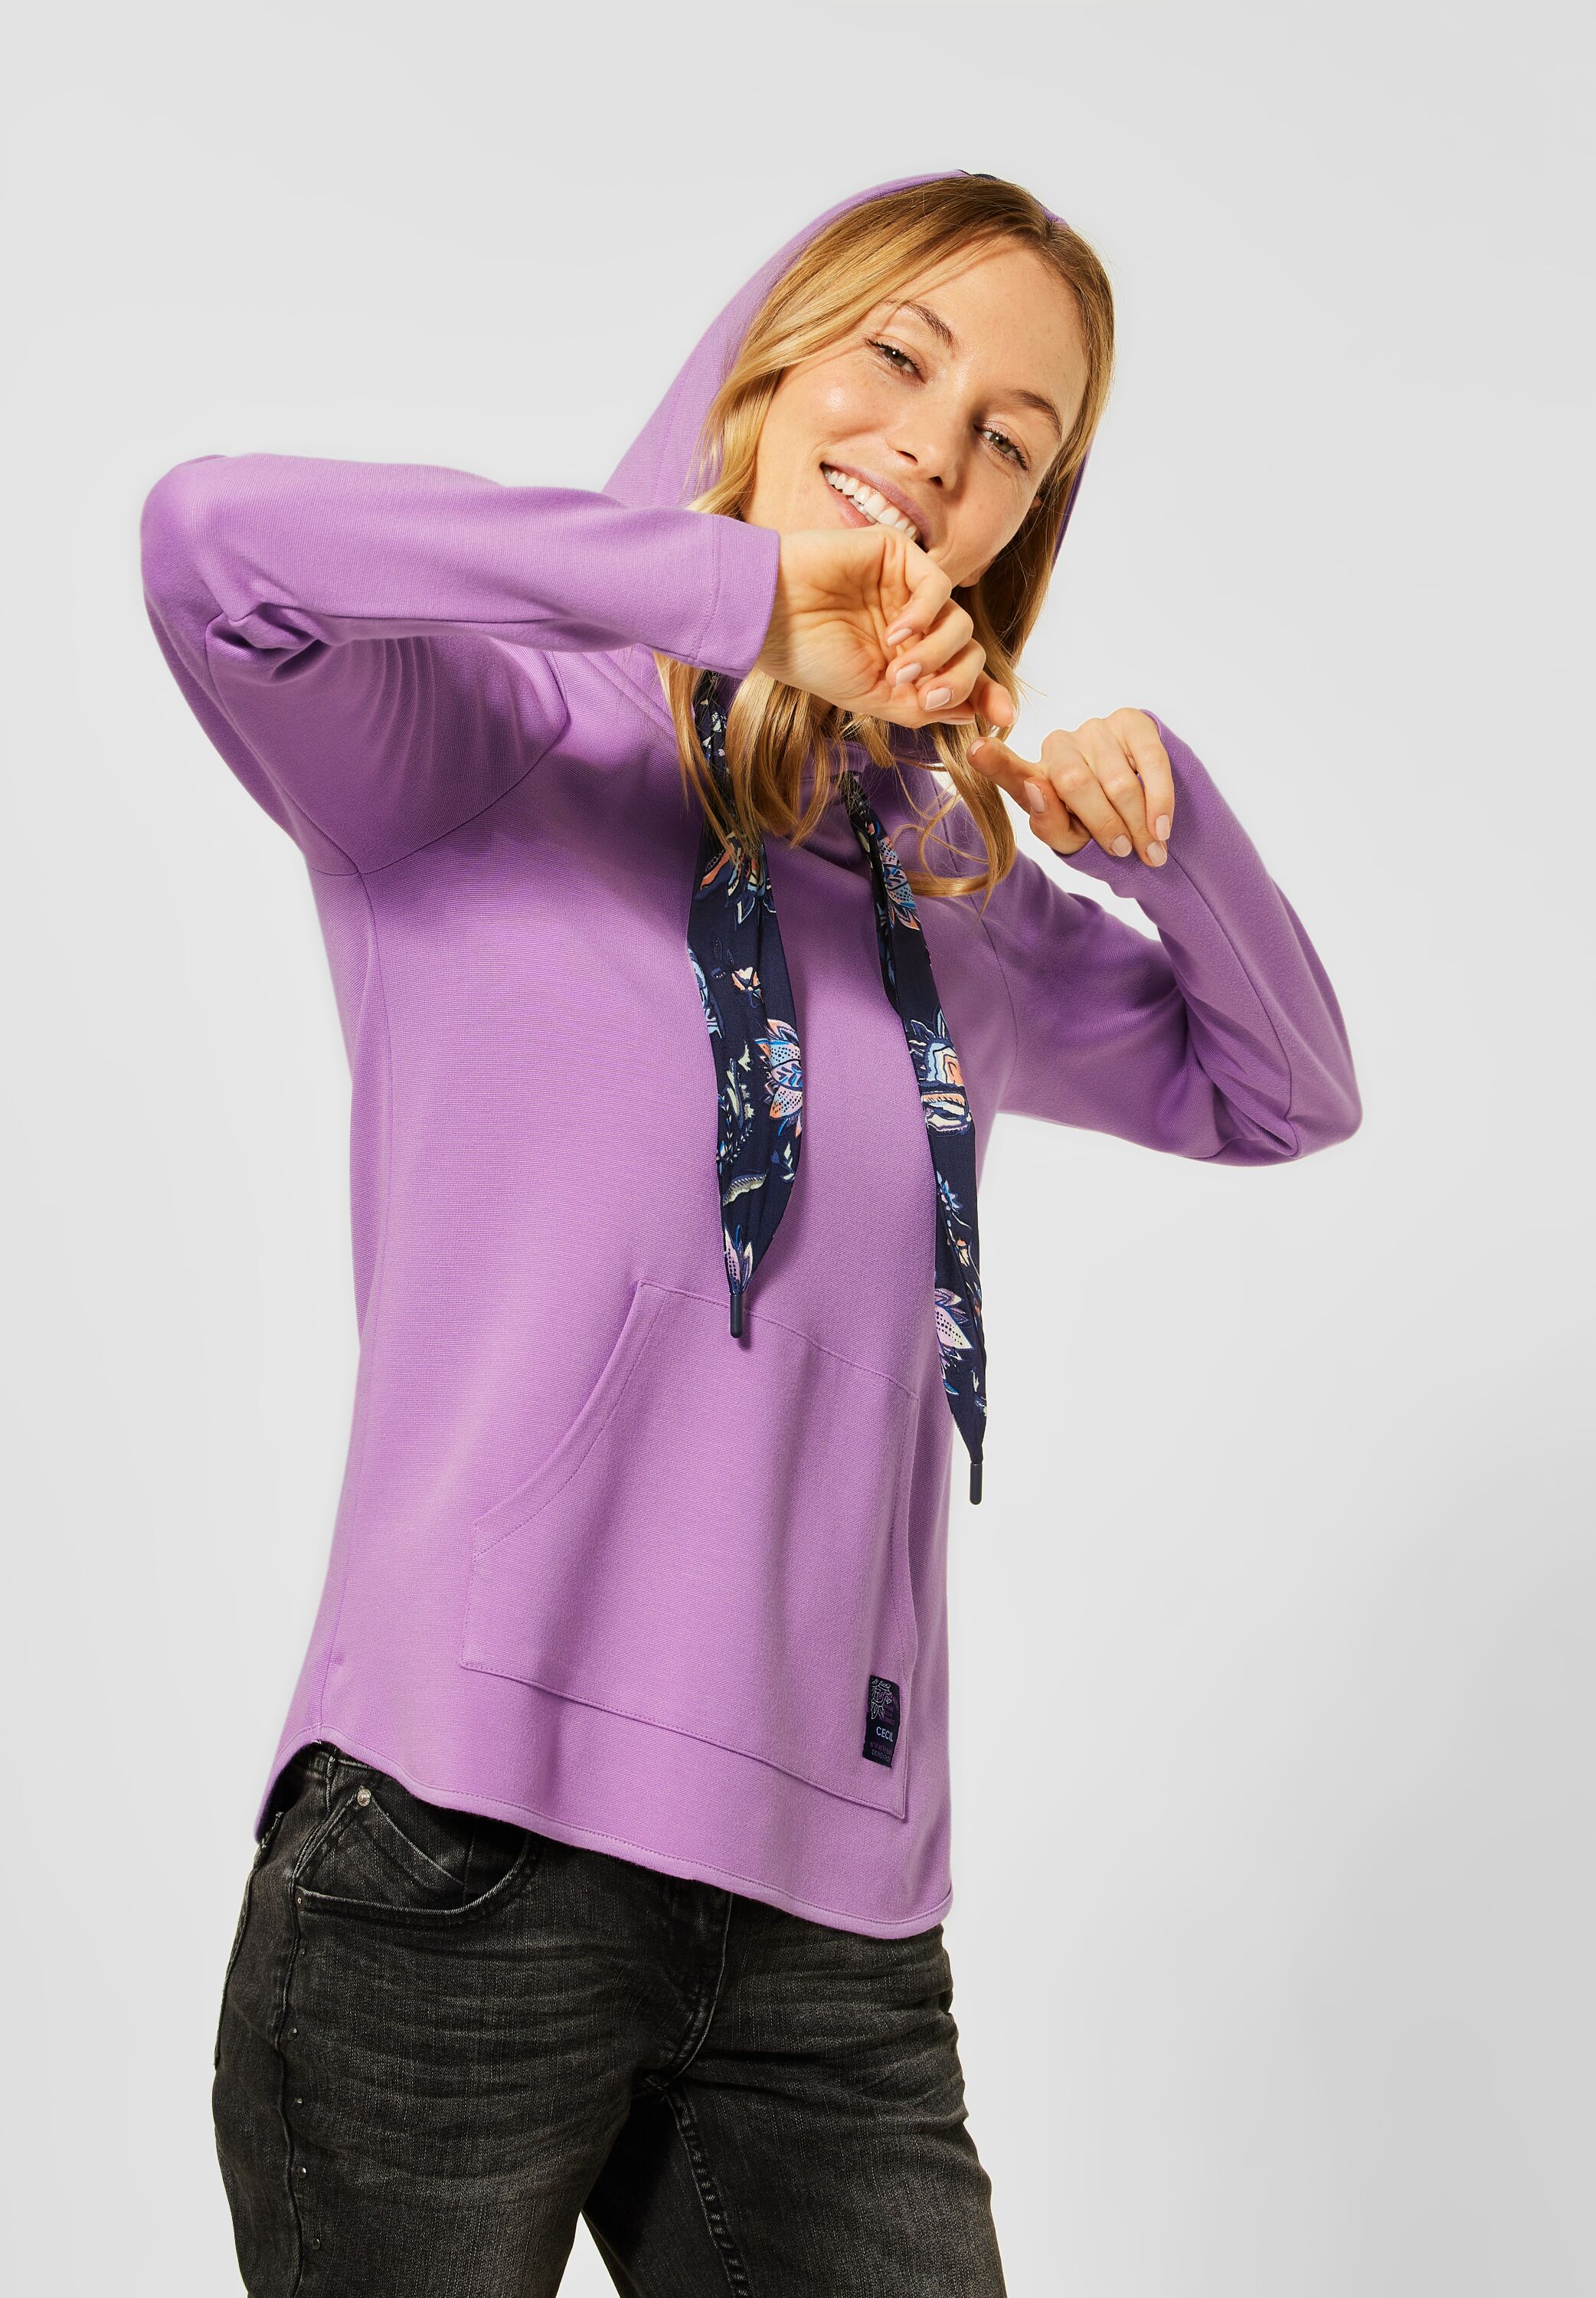 CECIL Shirt in Soft Violet - B315803-12746 Mode CONCEPT